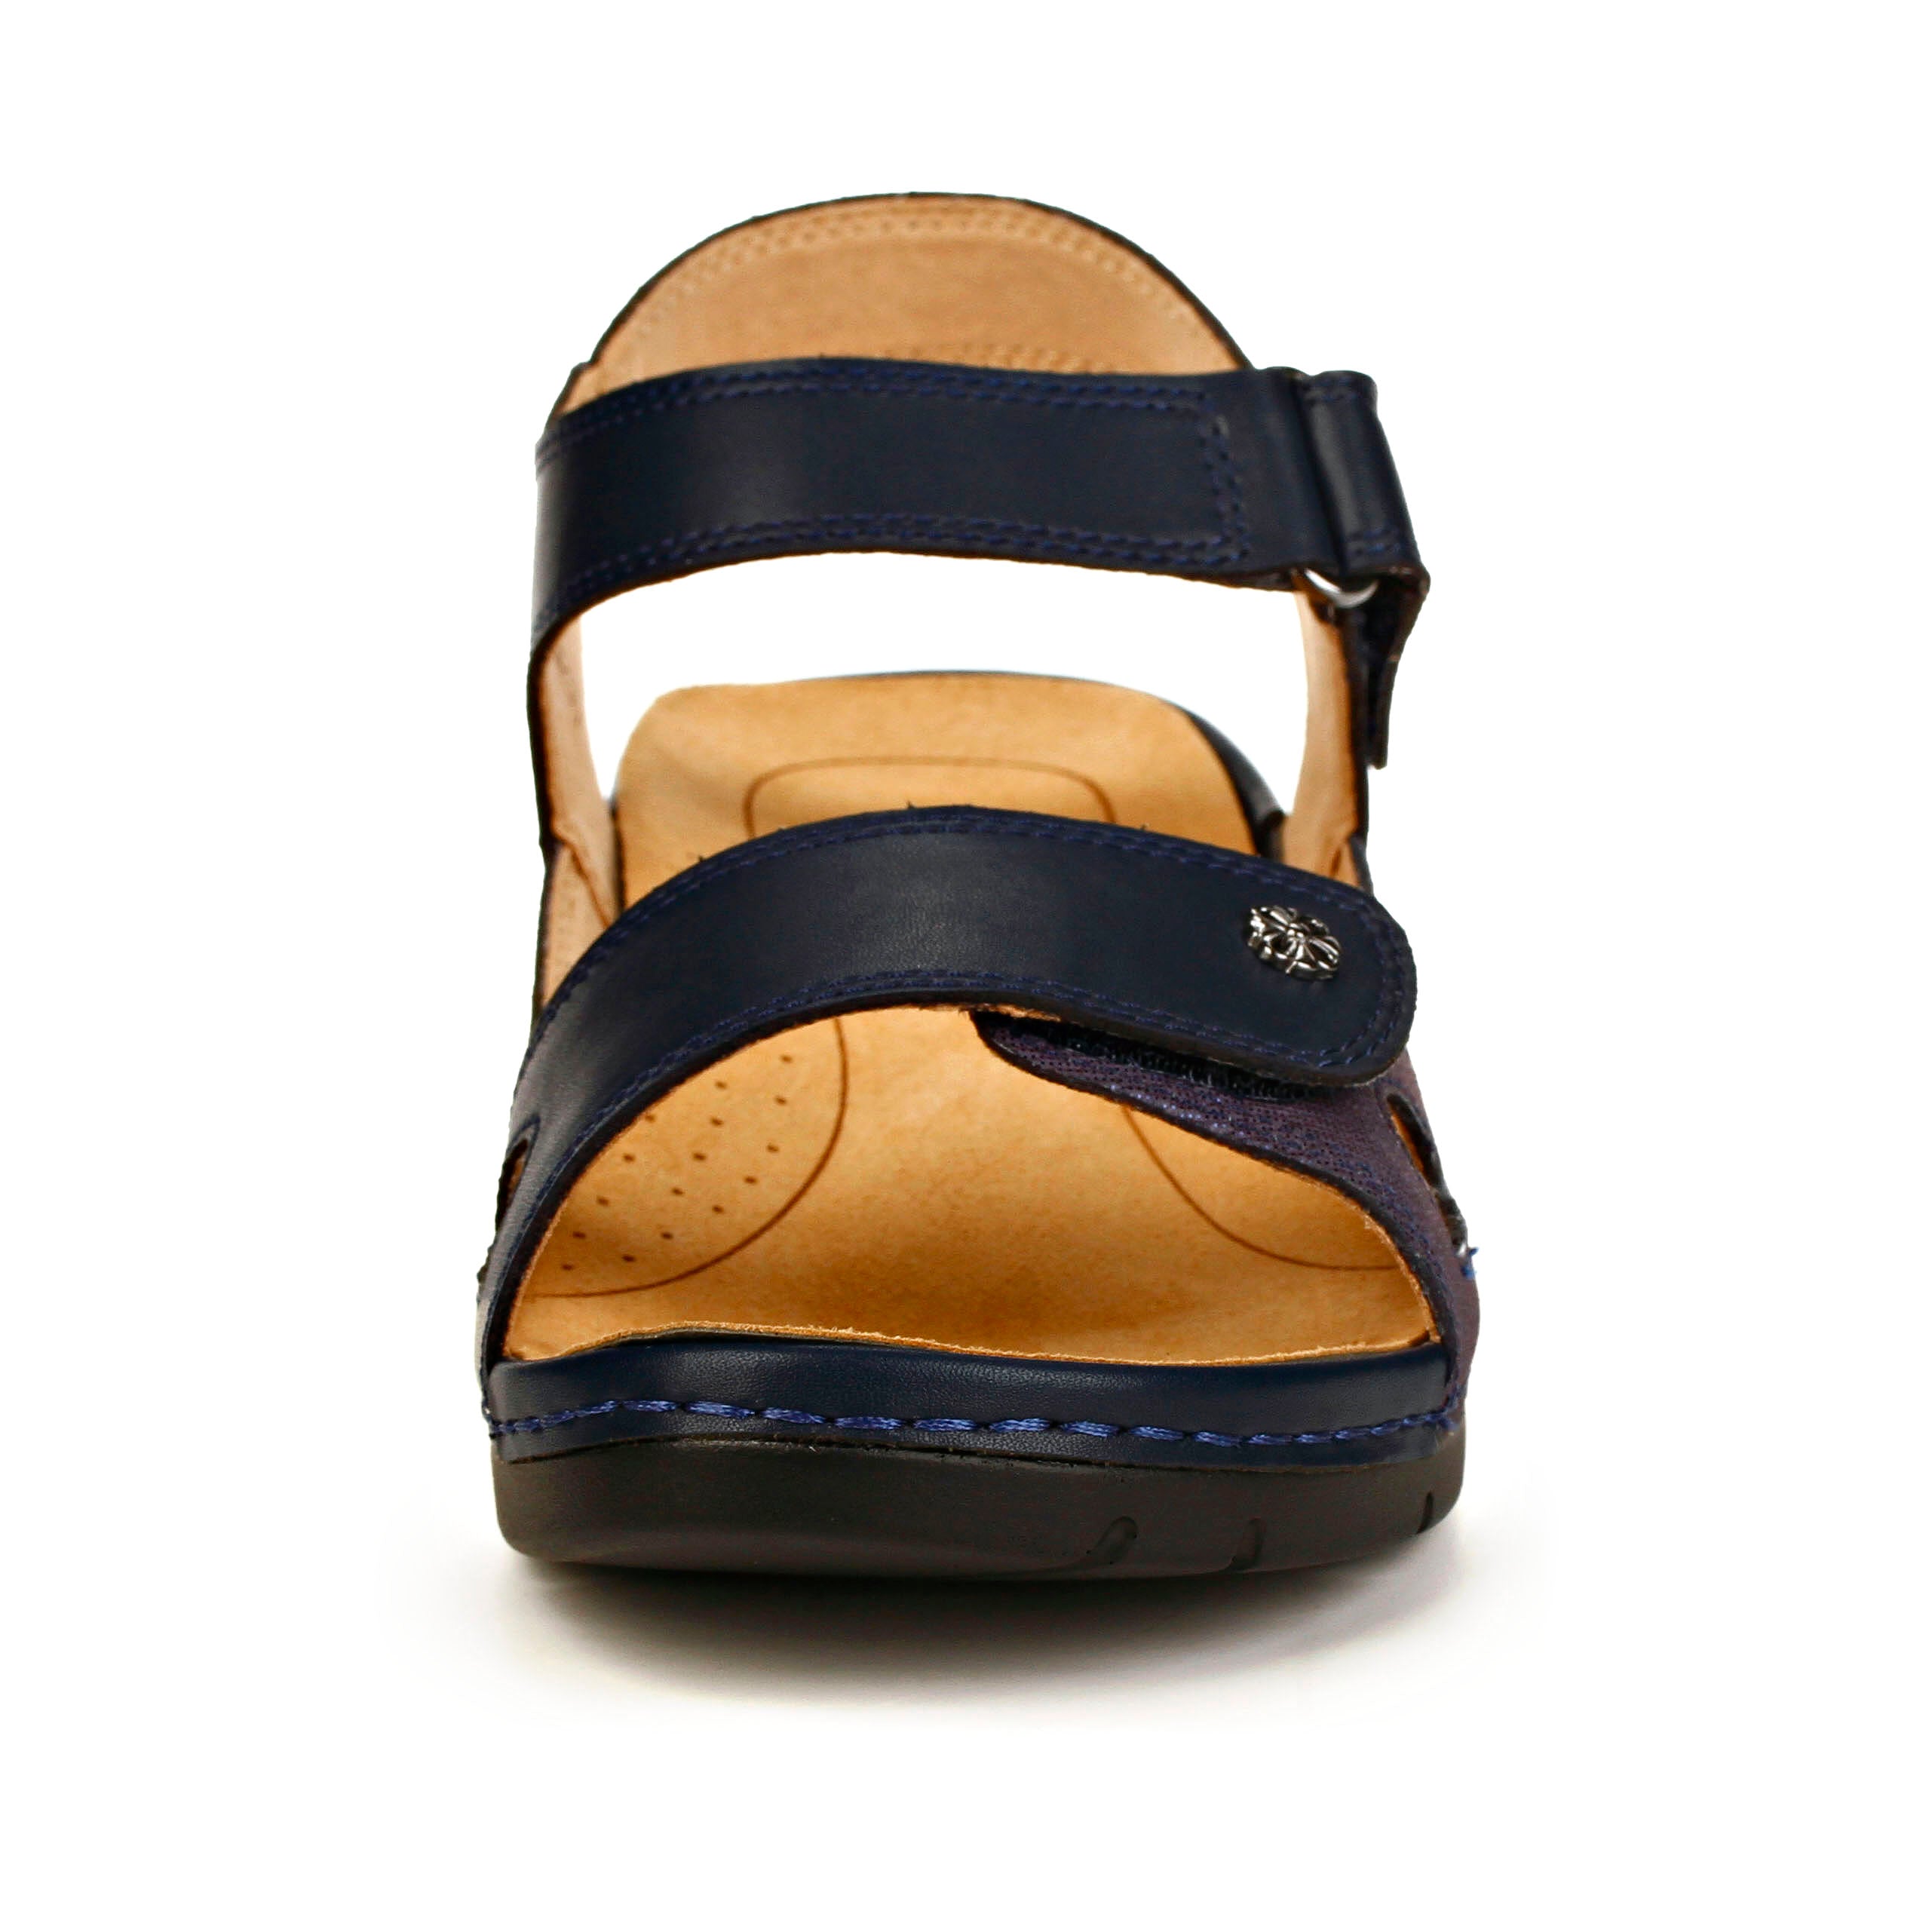 Dr. Kong Total Contact Sandals S8000390E3